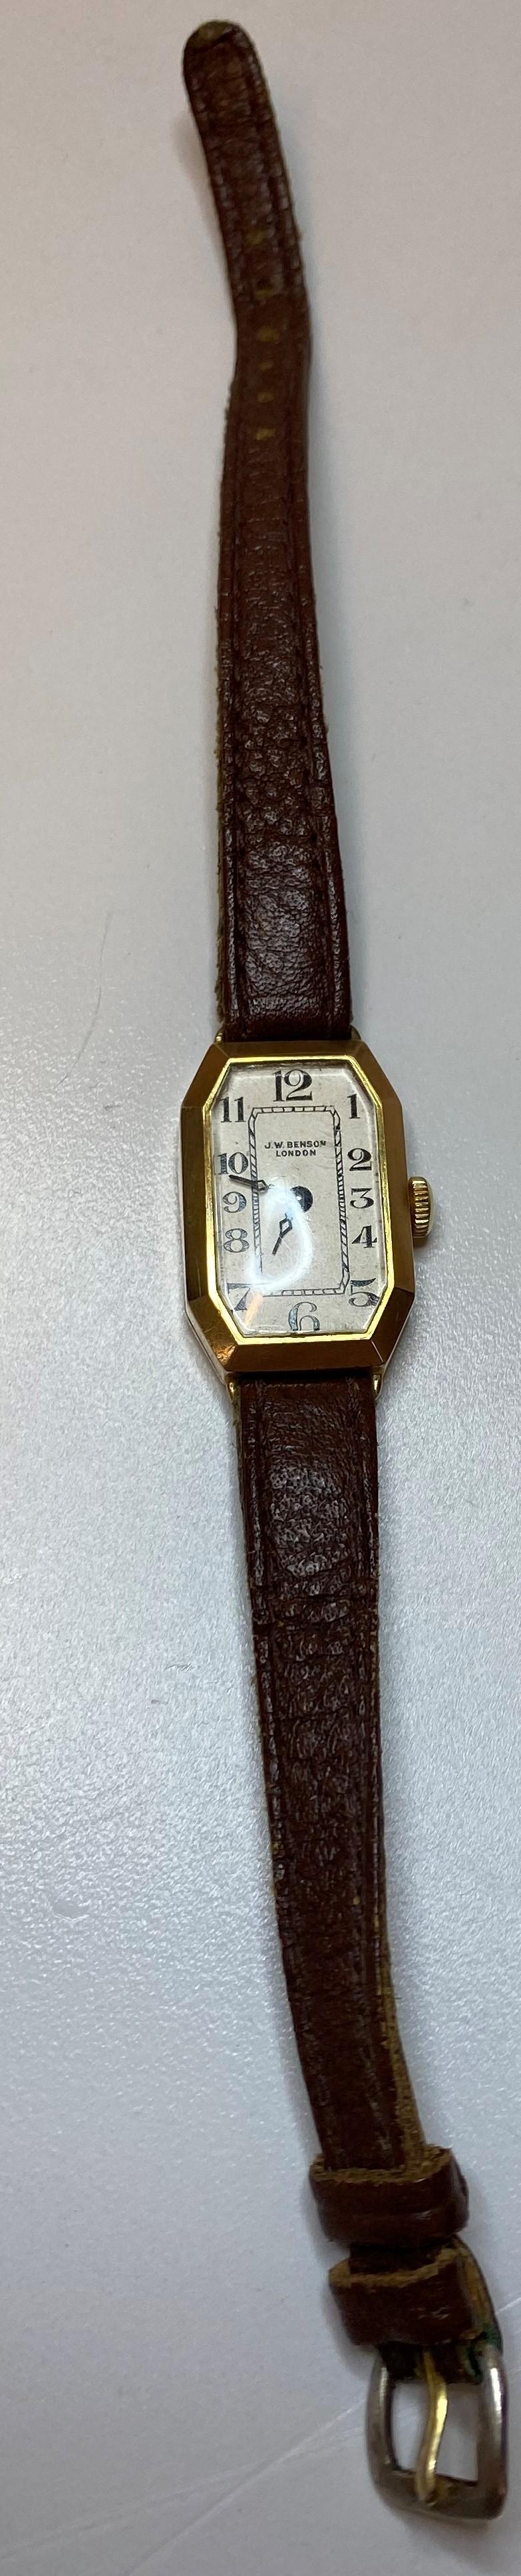 Vintage Ladies 9ct Gold Wristwatch by W.Benson of London, Art Deco Shape with an Octagonal face, - Image 4 of 7